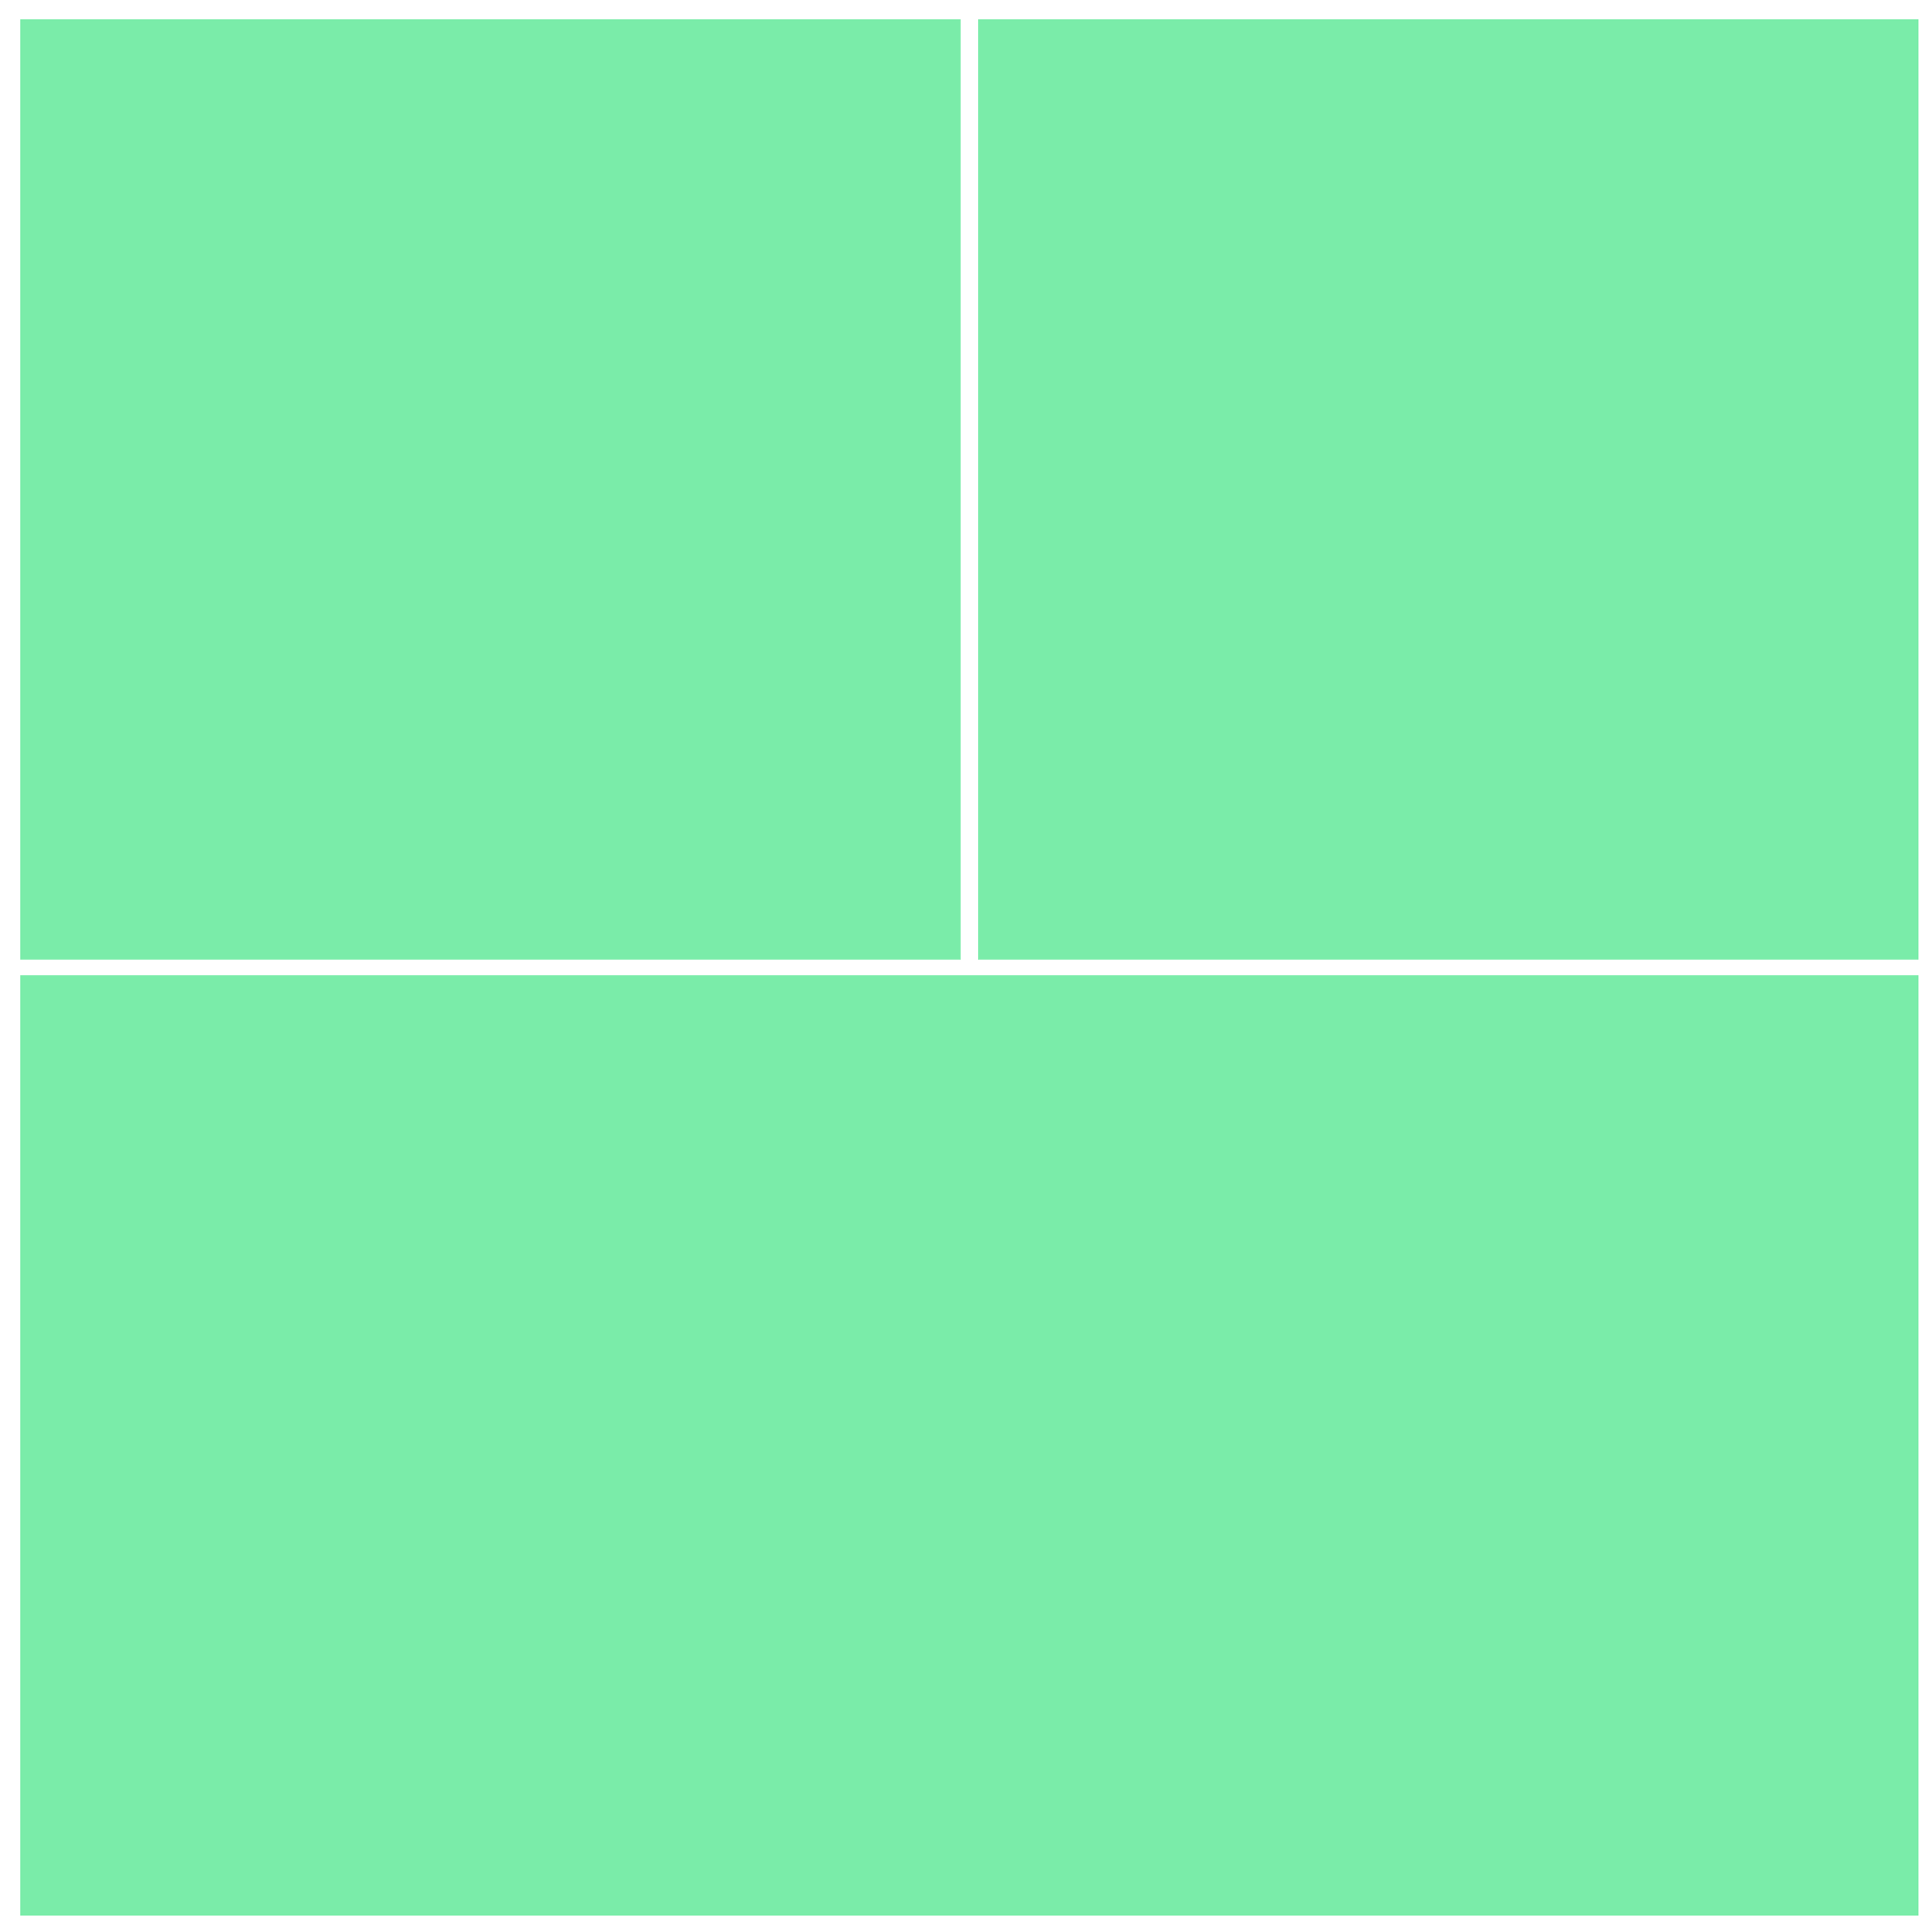 three images in a square template